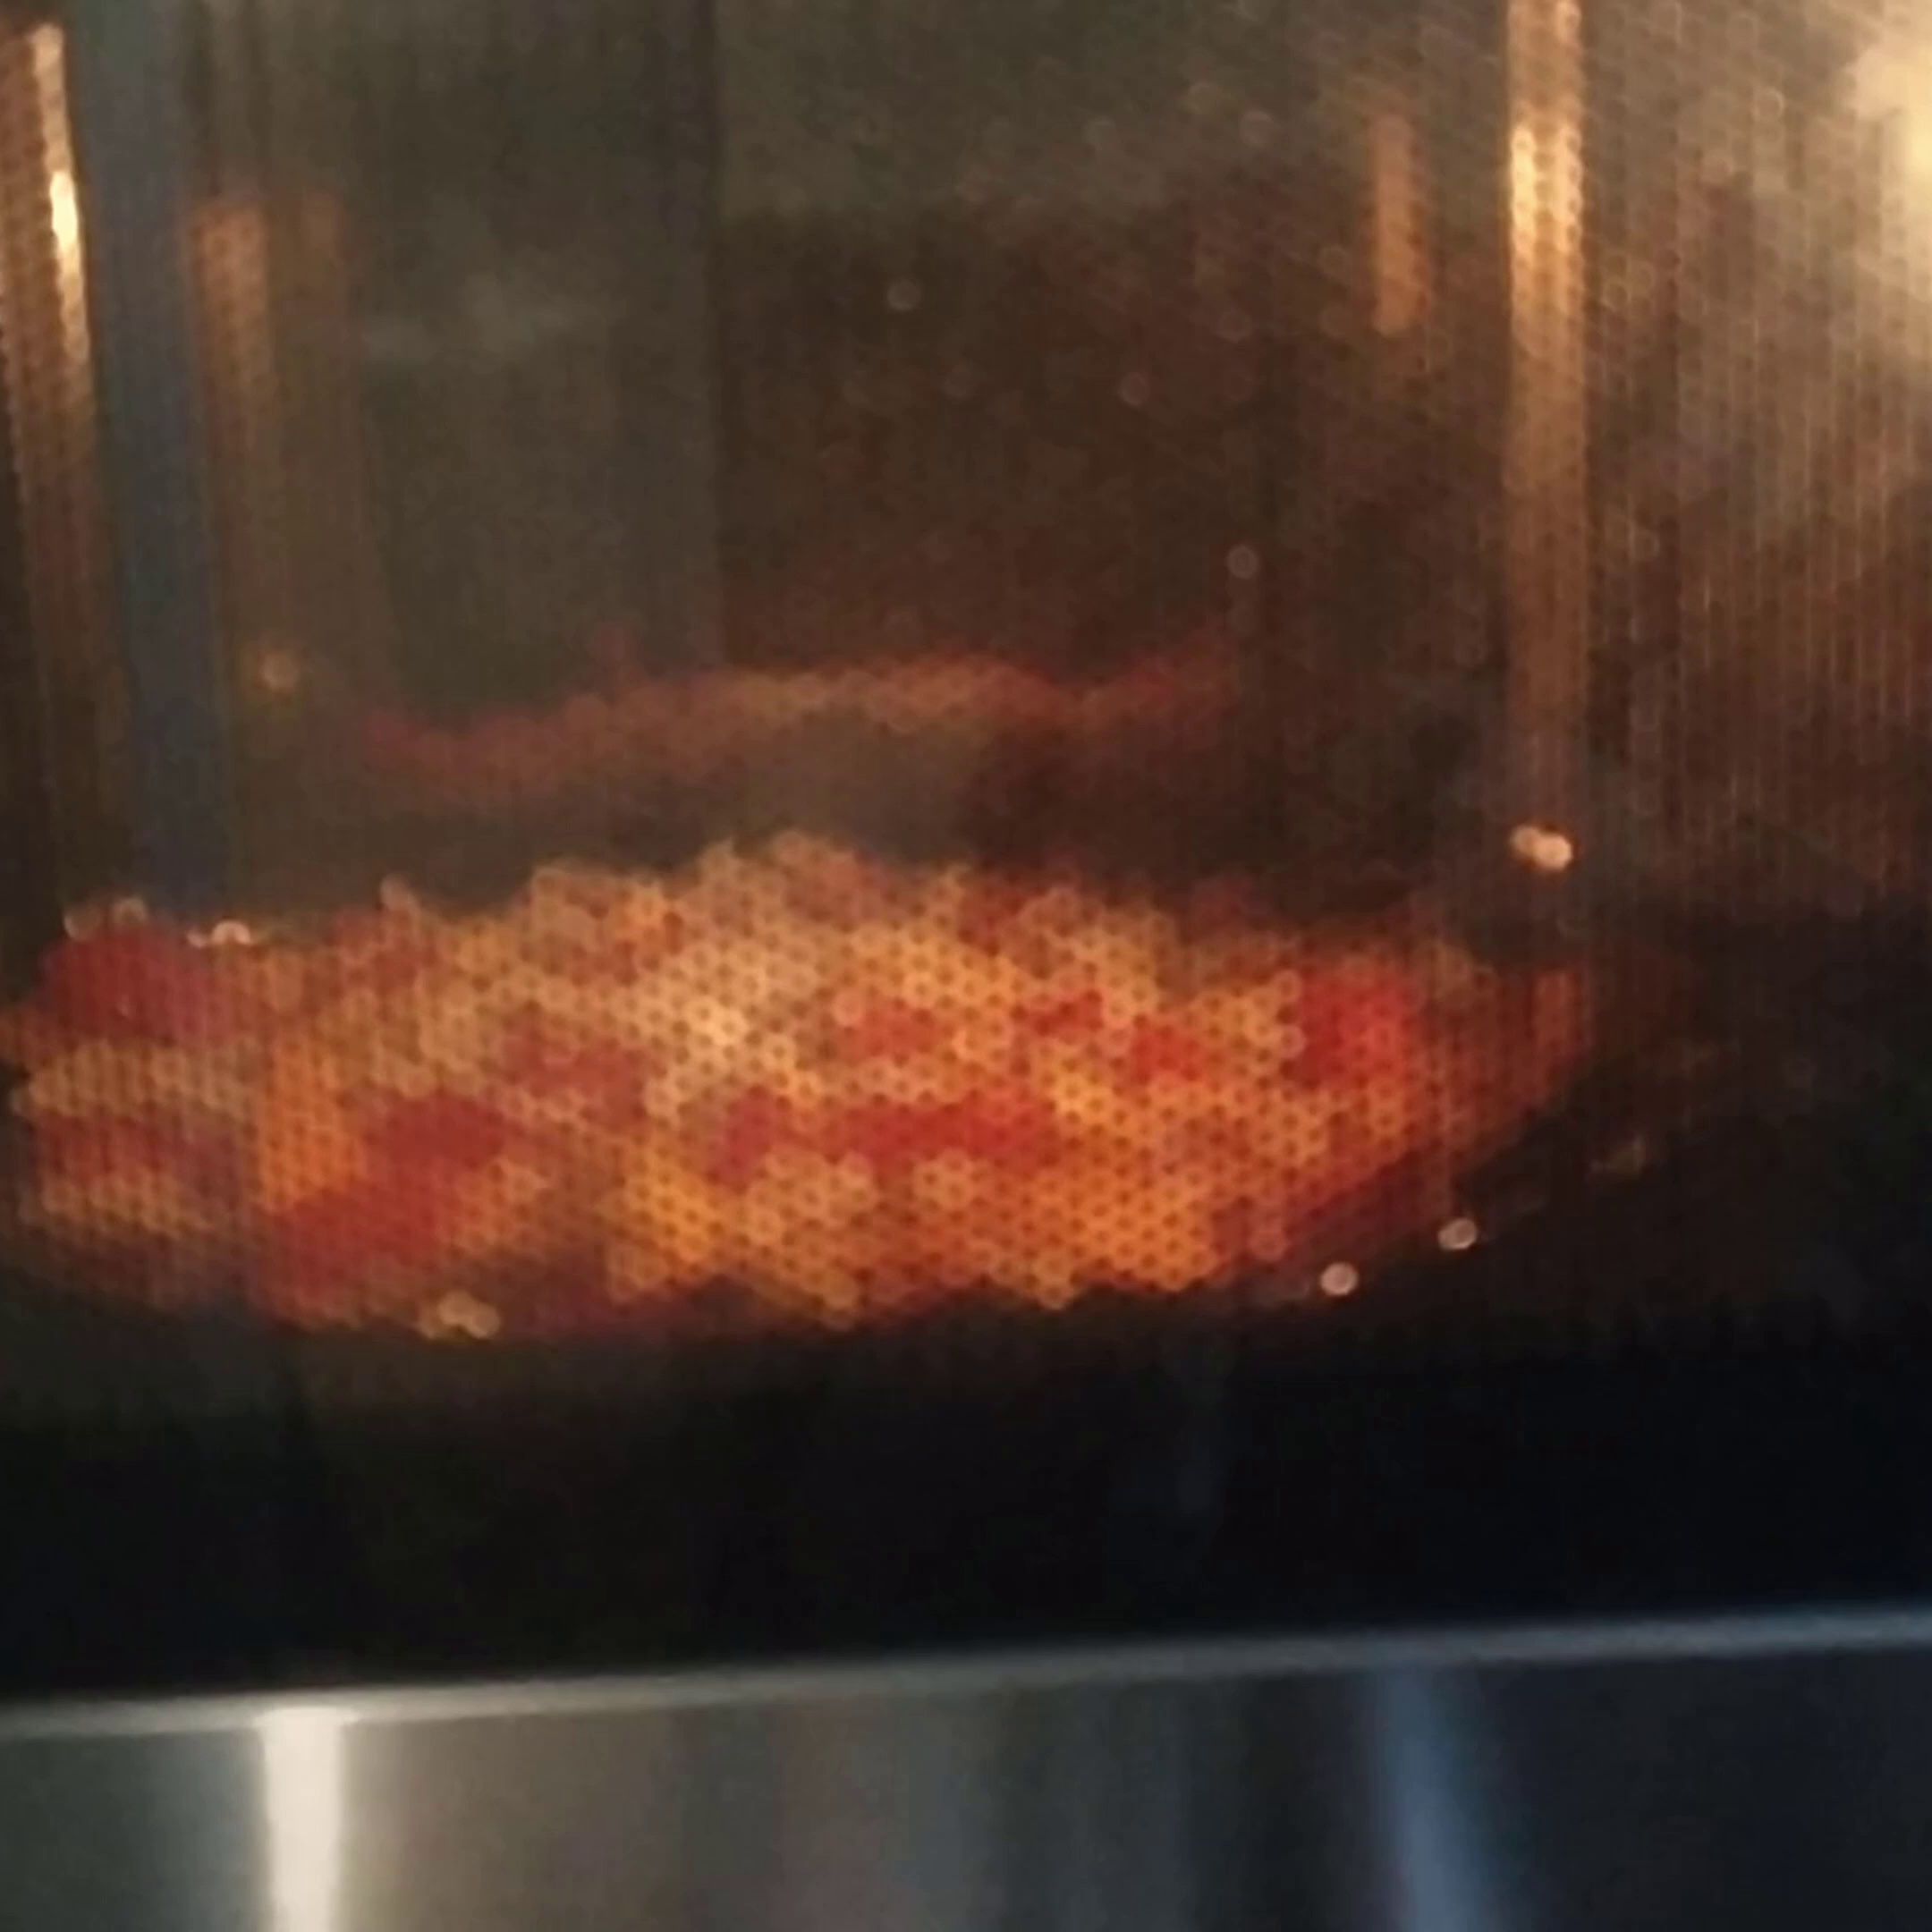 Step 5 - Now microwave it for 1-2 minutes until the cheese melts. Alternatively, you can bake it in oven at 180 degrees.